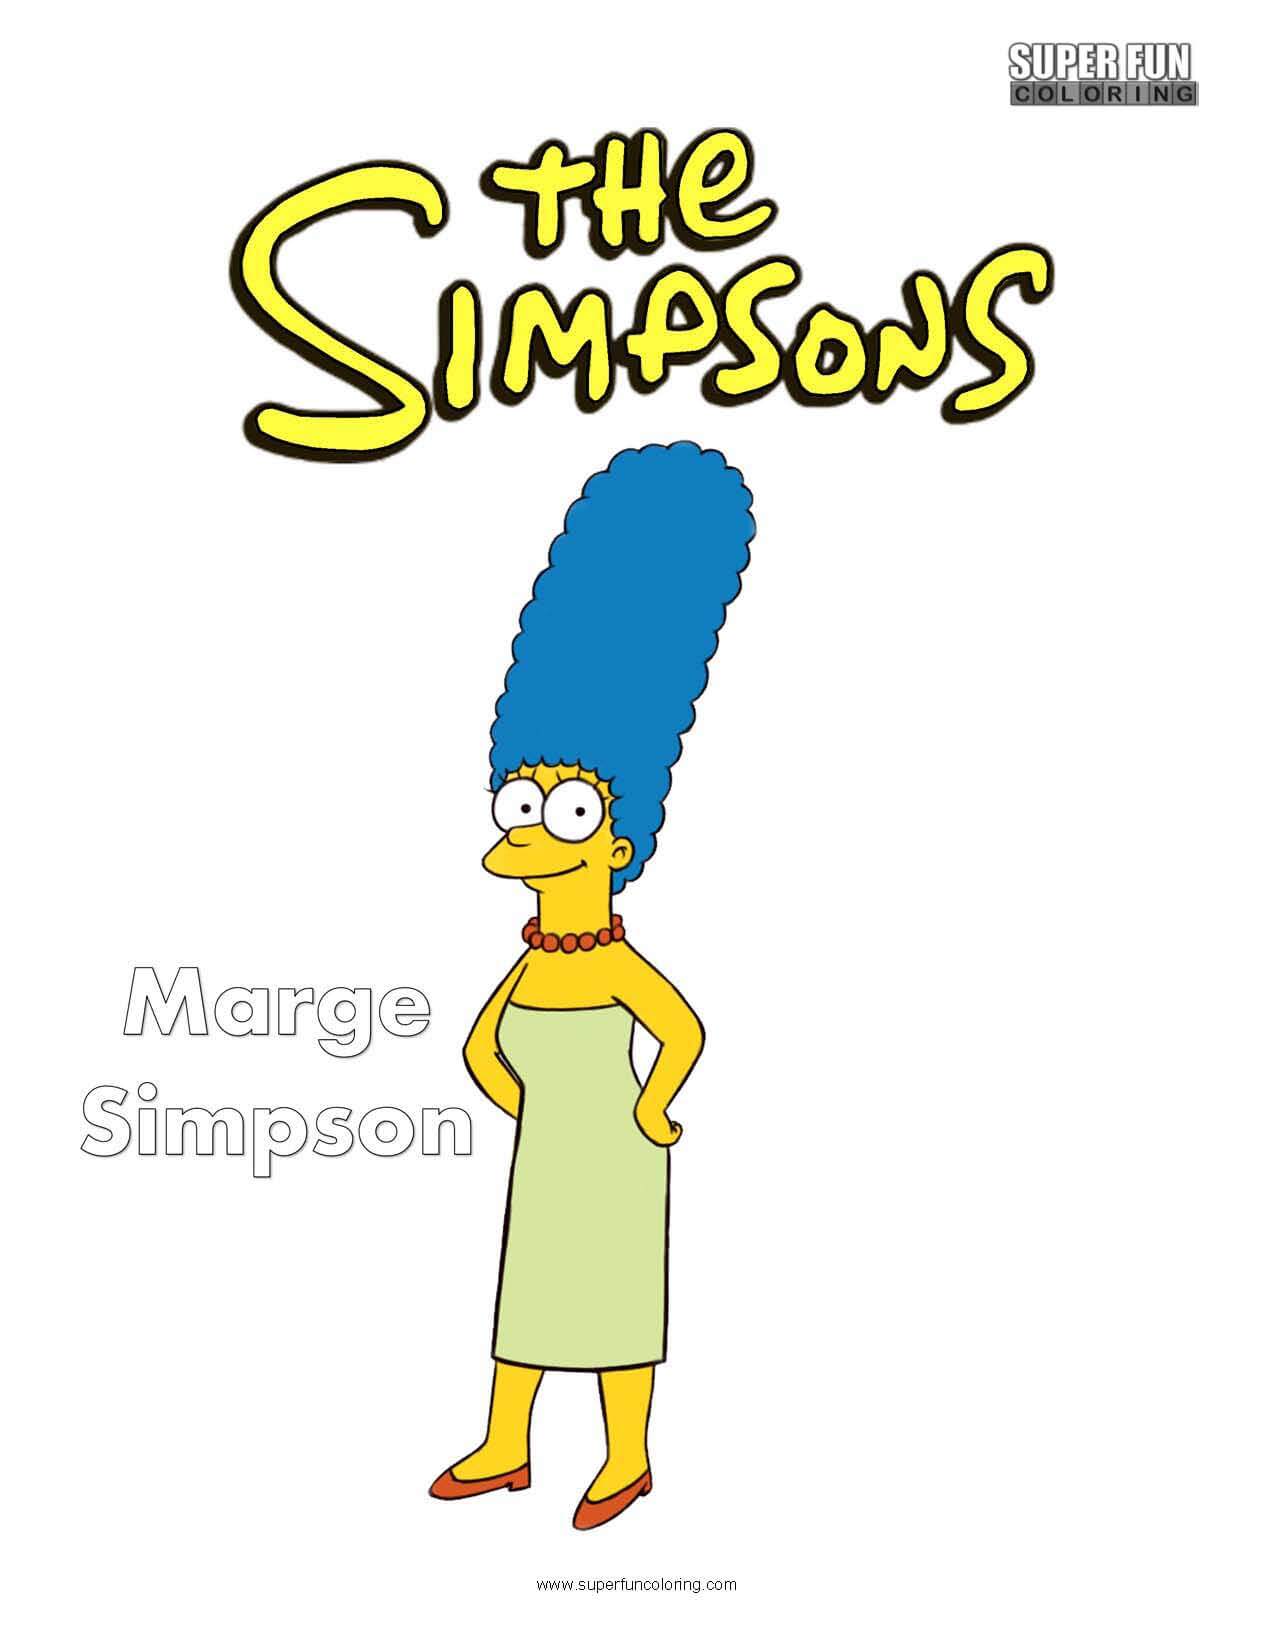 Marge Simpson Coloring Page The Simpsons